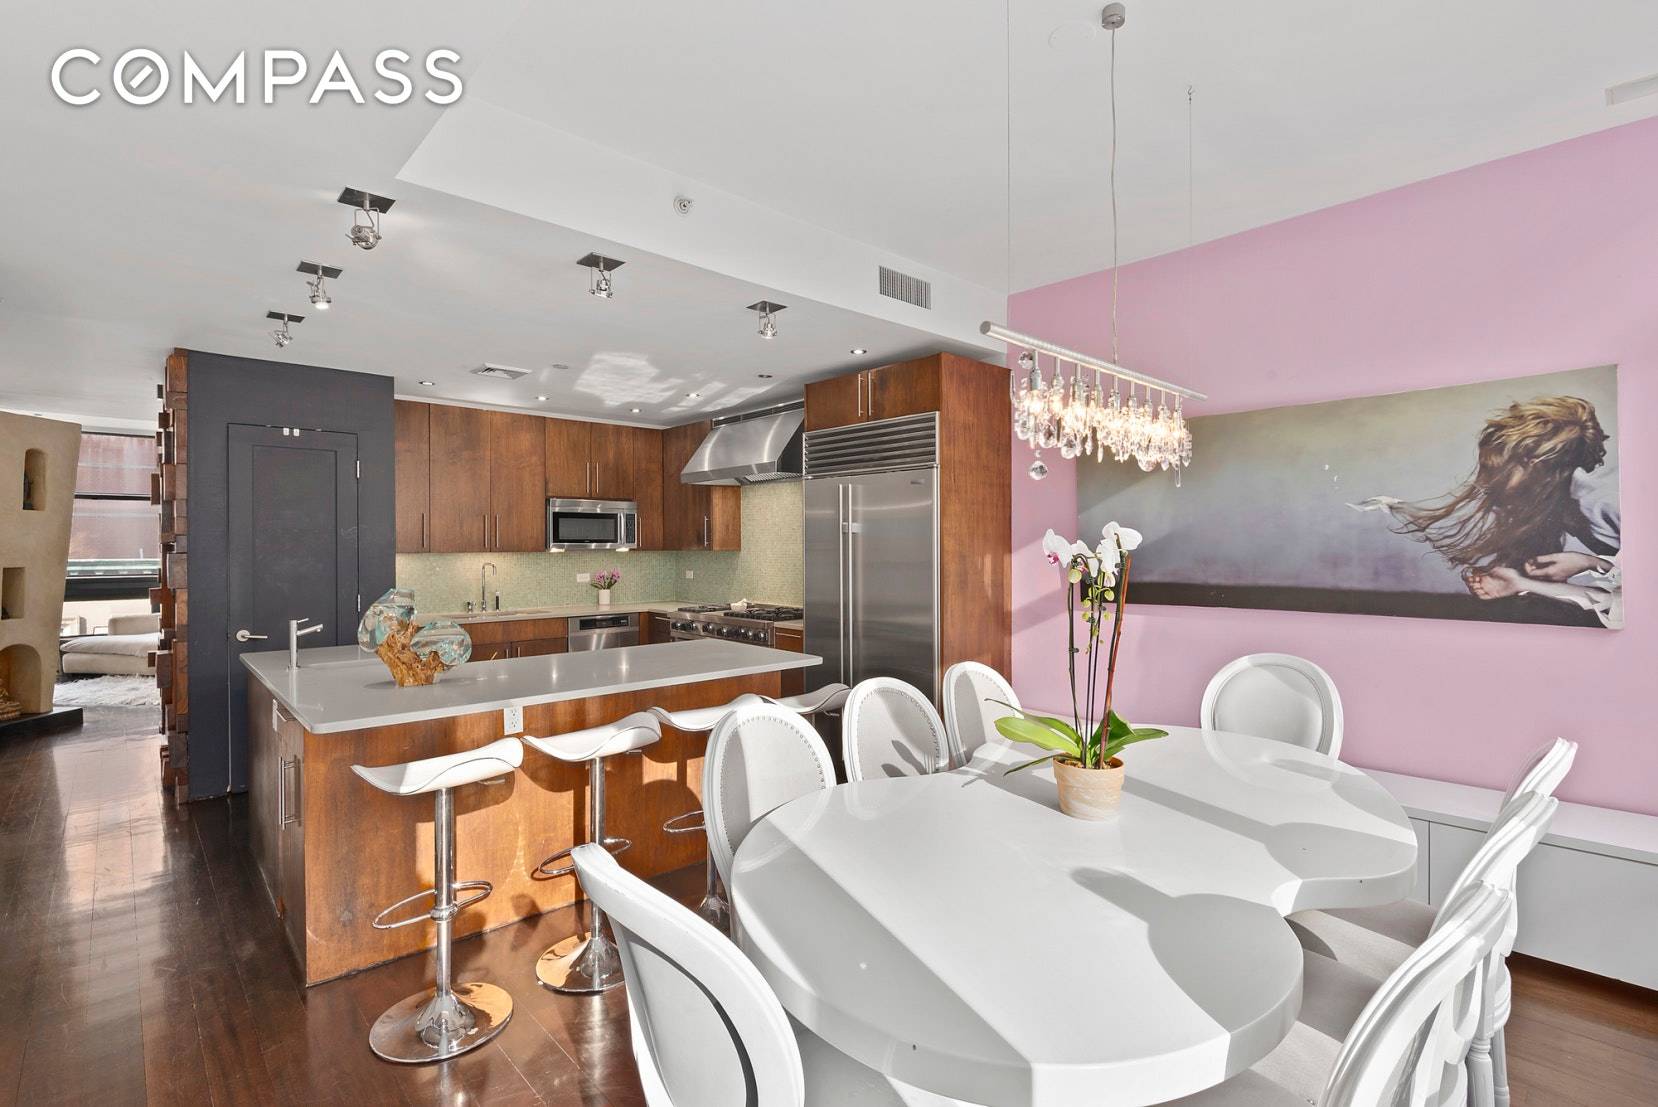 Open House is By Appointment Enjoy Tribeca penthouse living at its finest in this three bedroom, two and a half bathroom duplex loft filled with exquisite designer details, private outdoor ...